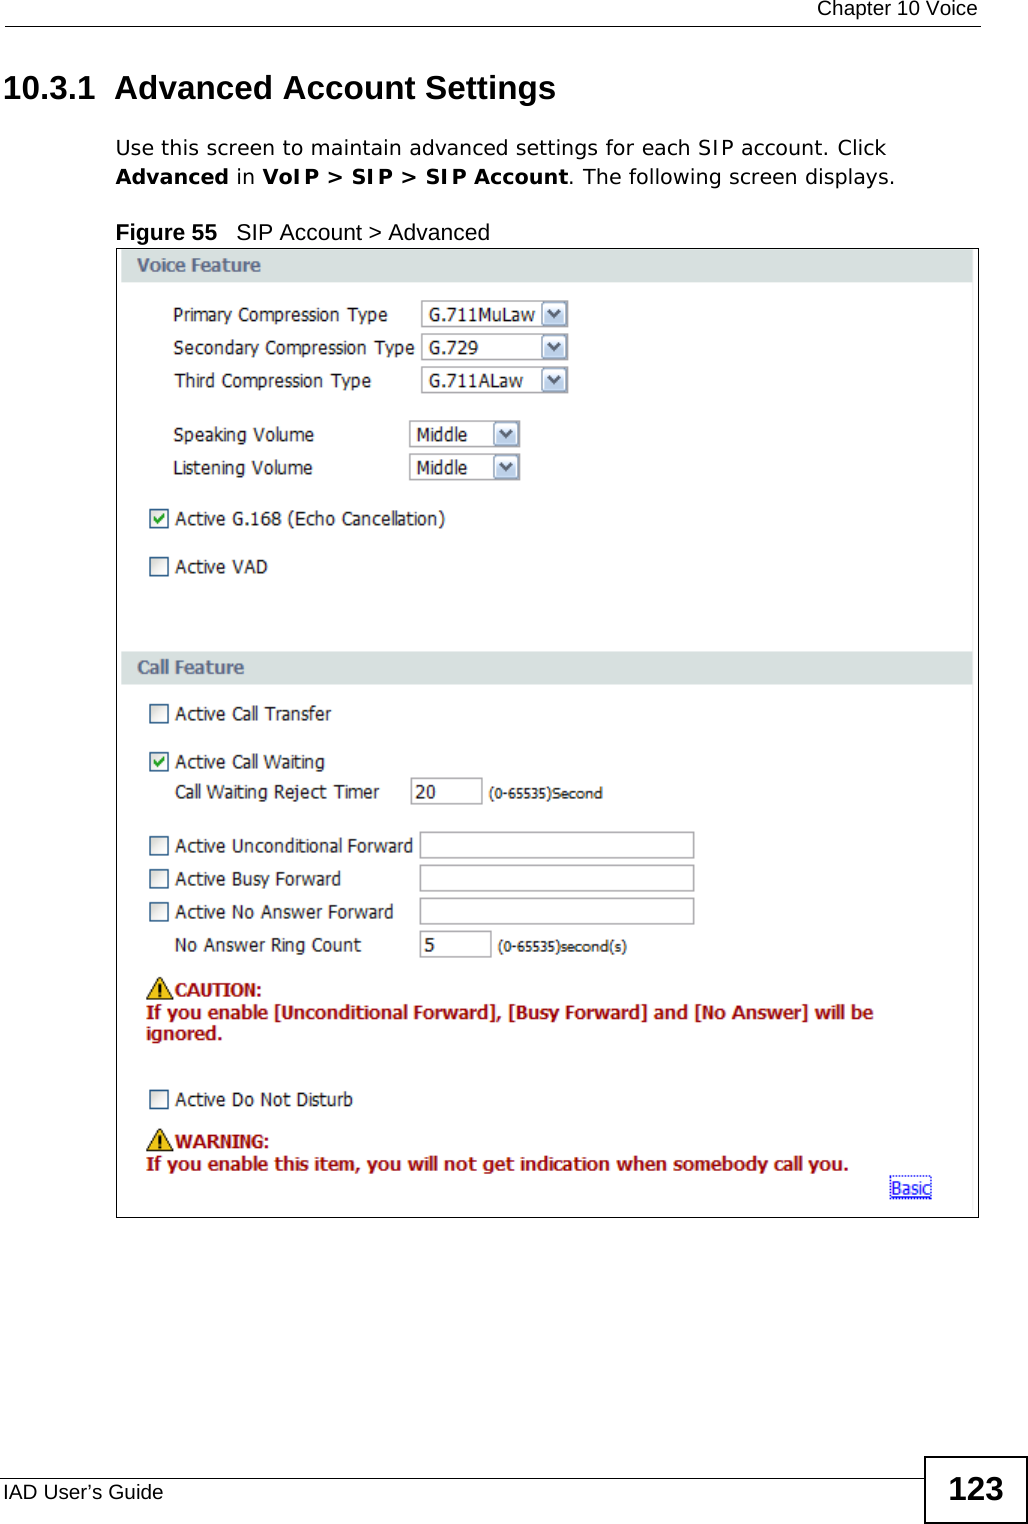  Chapter 10 VoiceIAD User’s Guide 12310.3.1  Advanced Account SettingsUse this screen to maintain advanced settings for each SIP account. Click Advanced in VoIP &gt; SIP &gt; SIP Account. The following screen displays.Figure 55   SIP Account &gt; Advanced